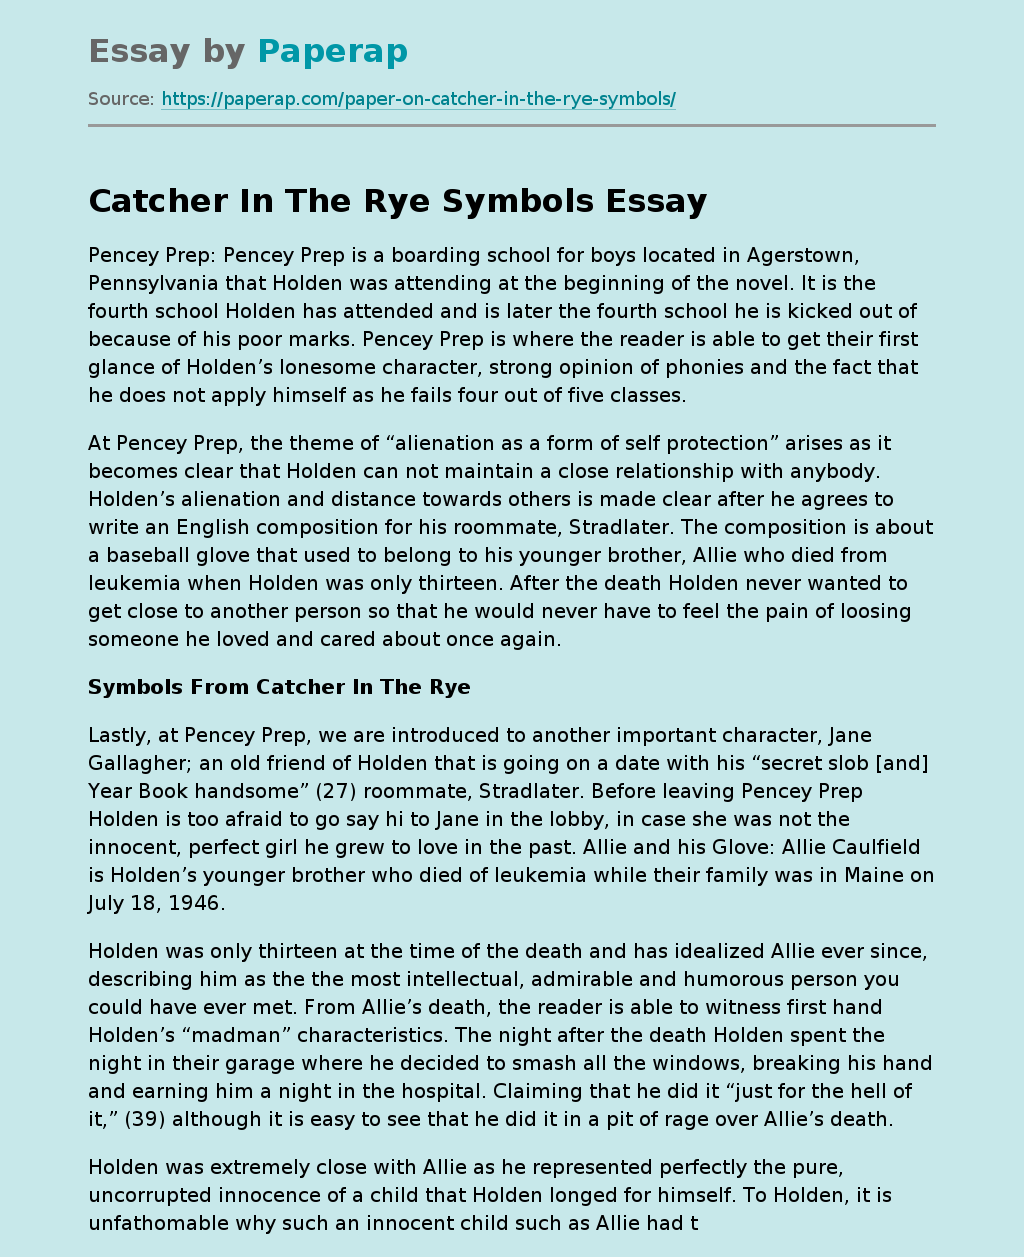 Symbols From Catcher In The Rye